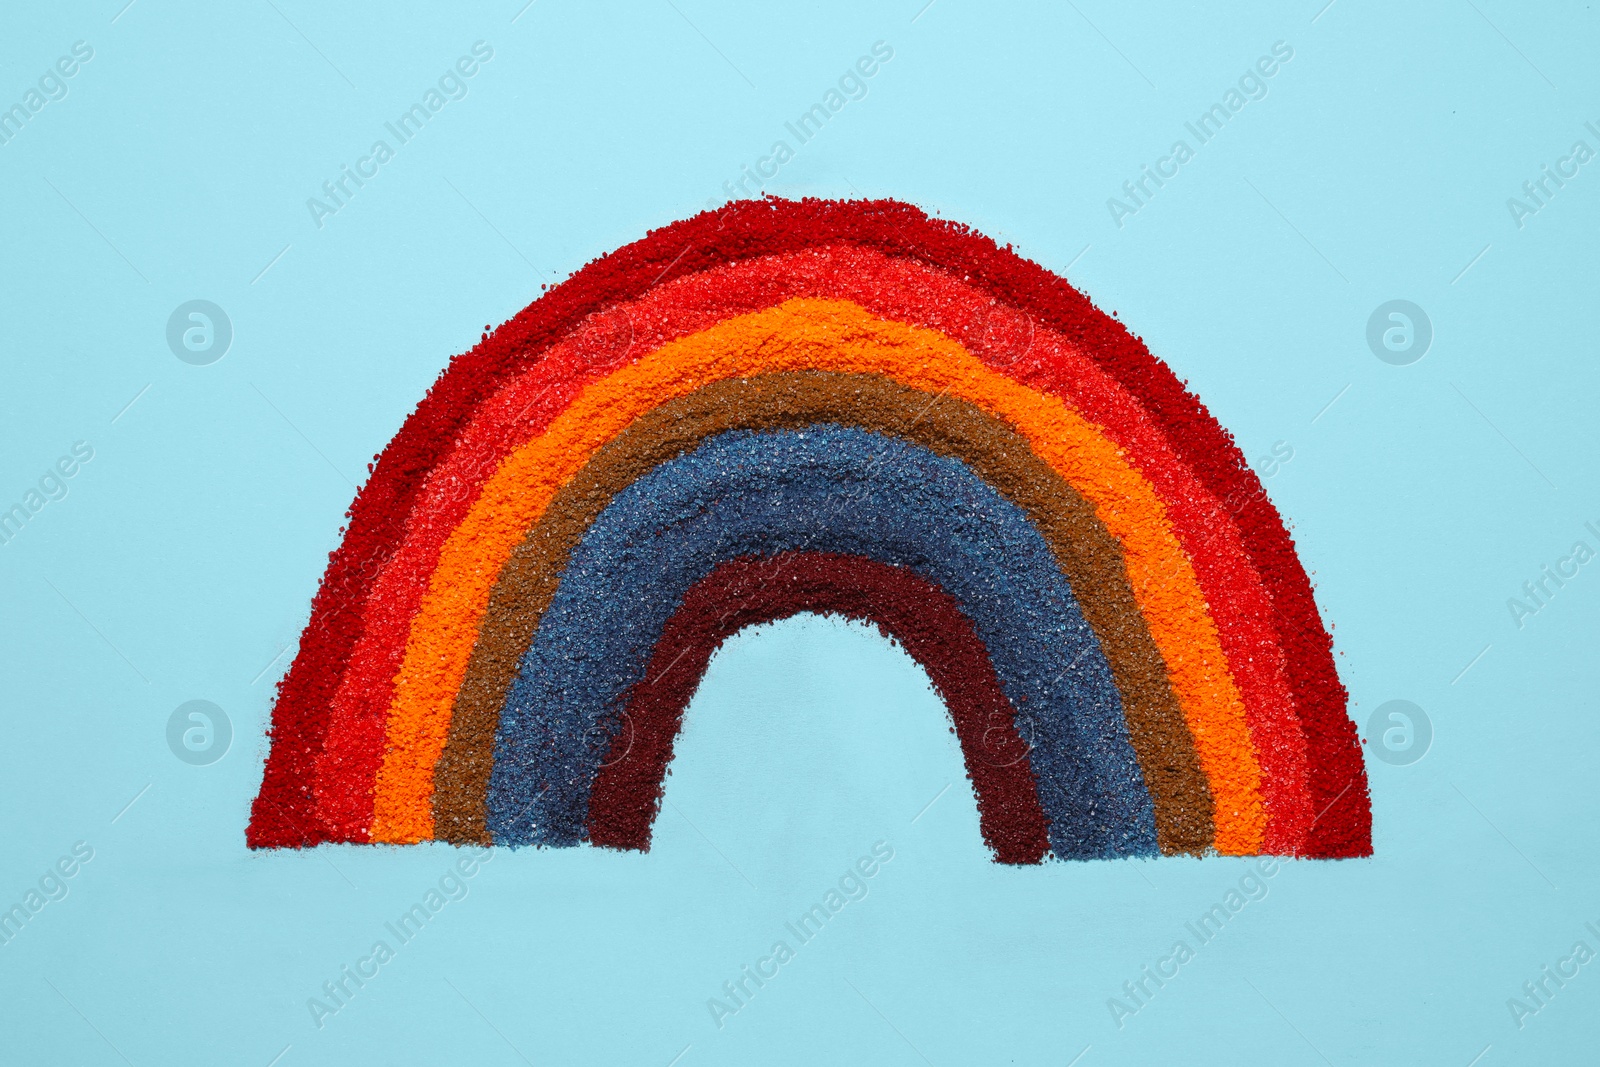 Photo of Rainbow made of different food coloring on light blue background, top view